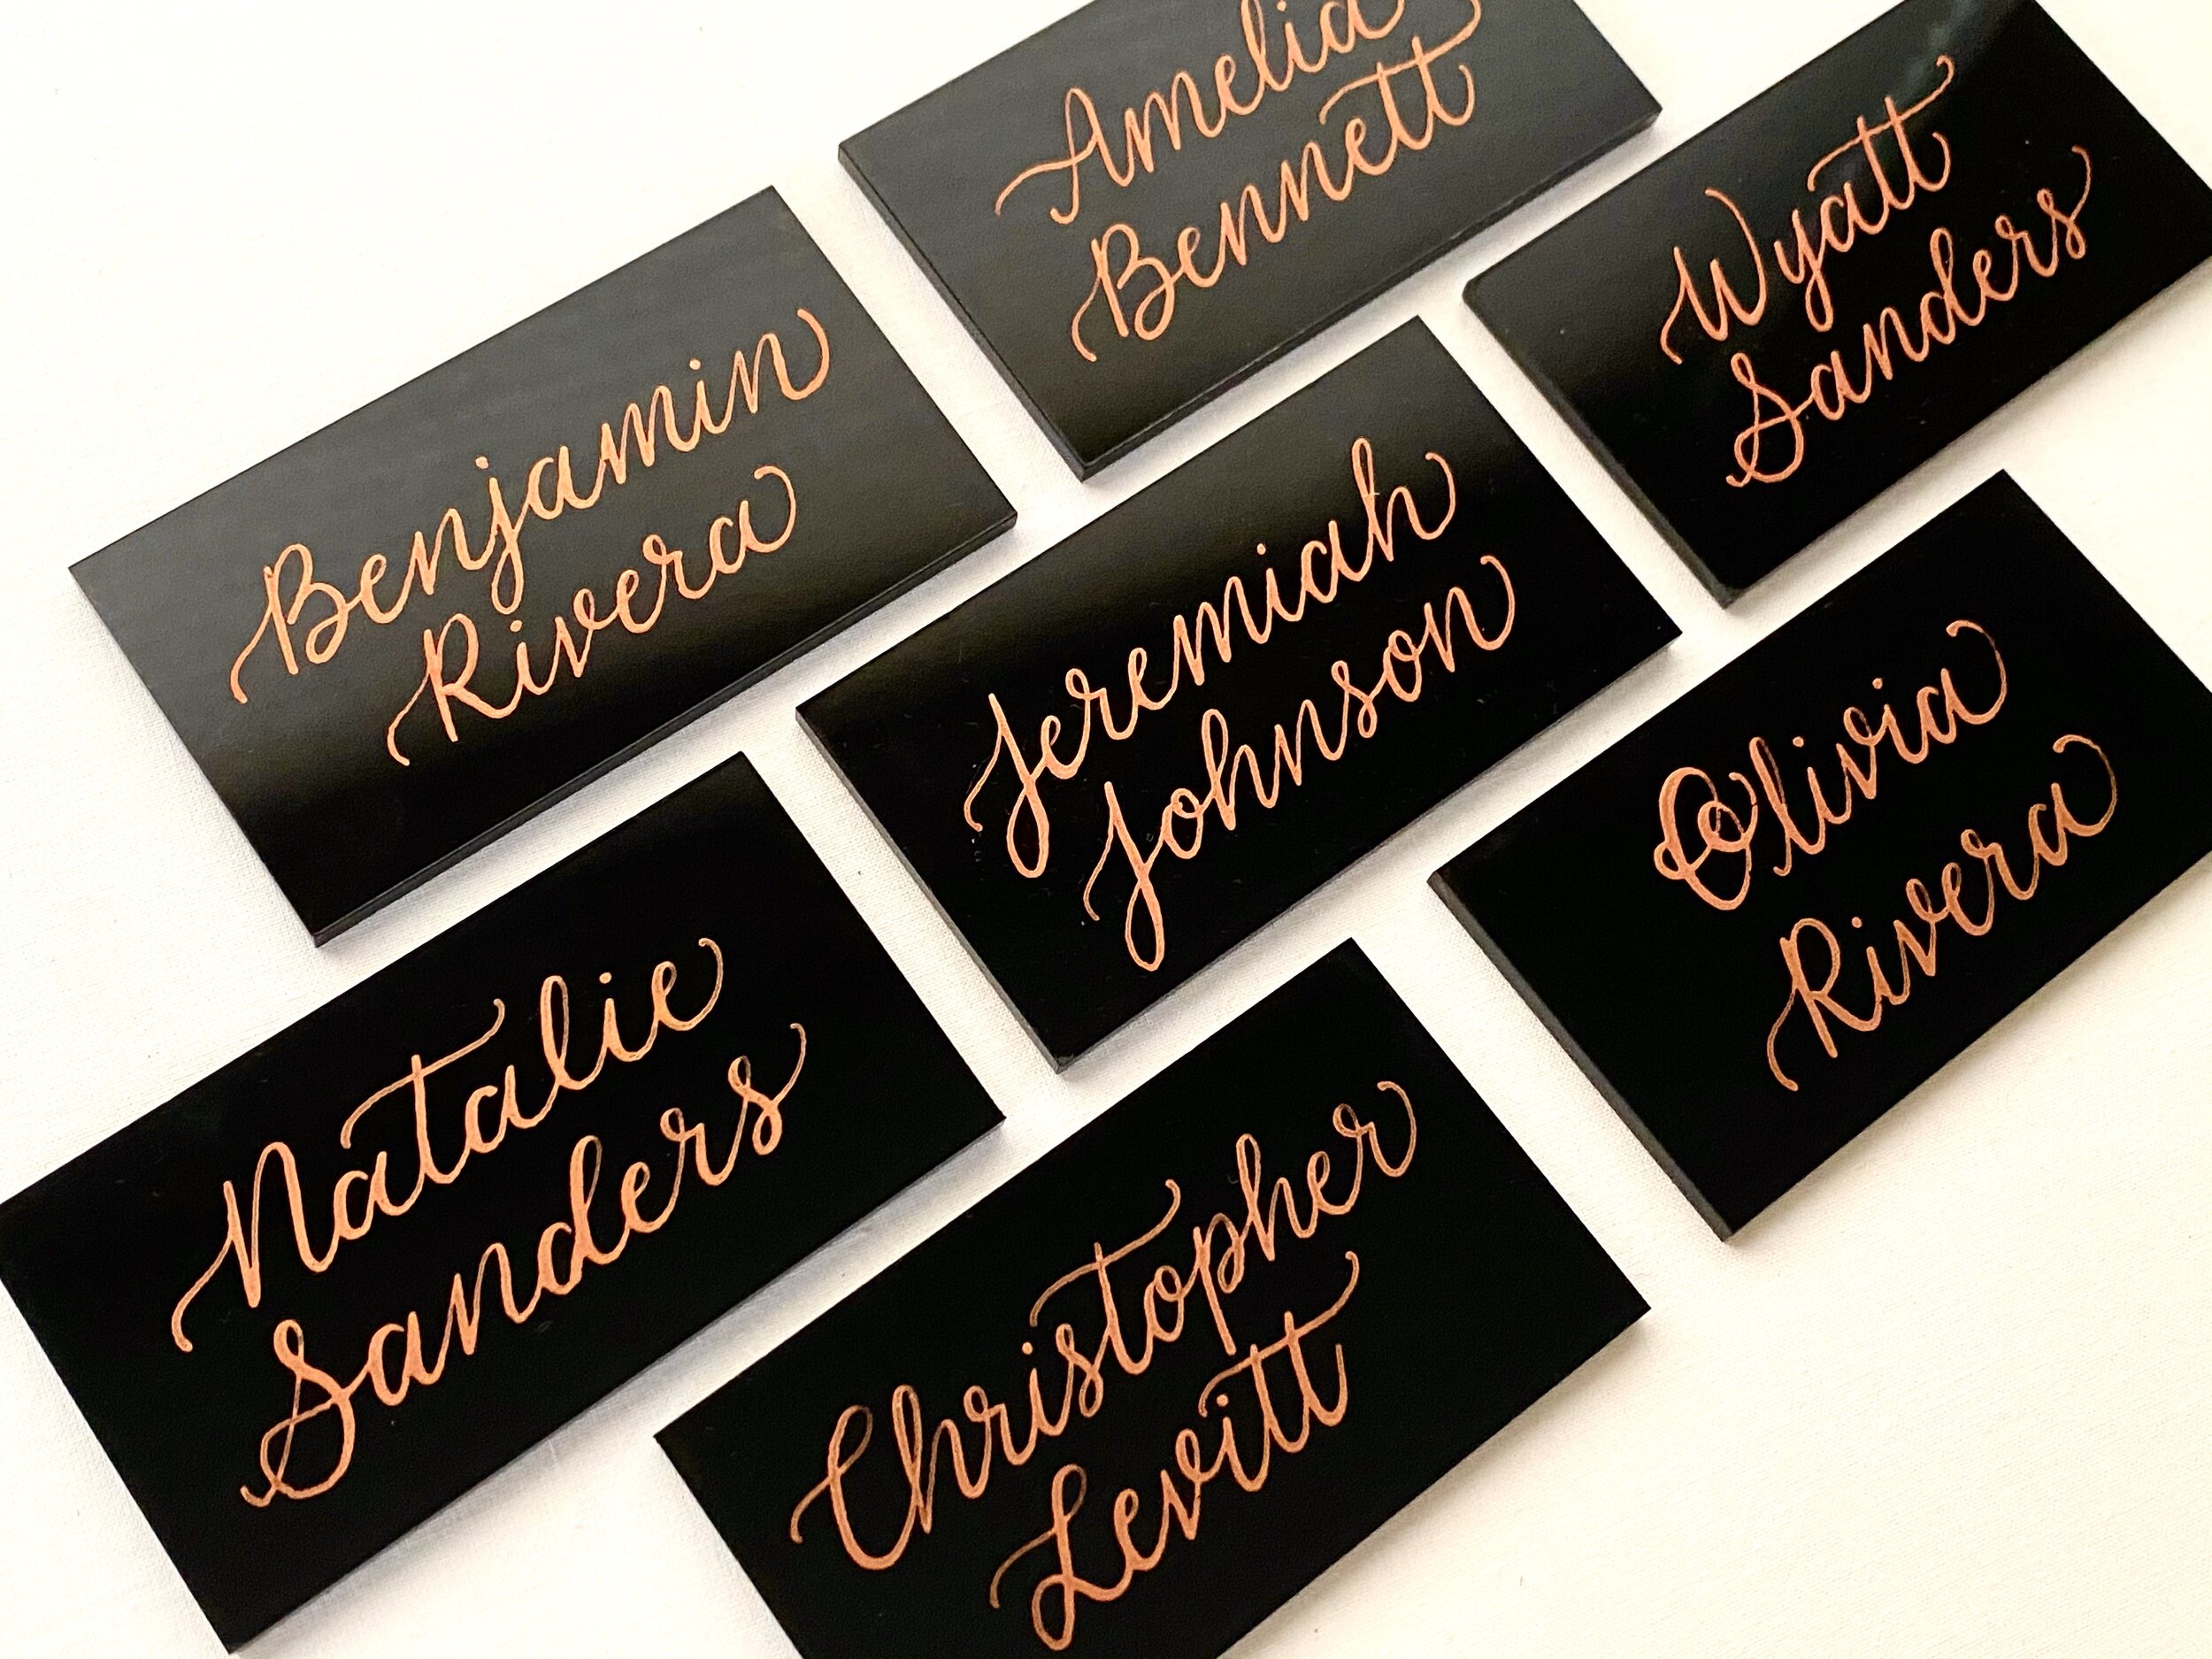 Copper on Black Acrlyic place cards.JPG